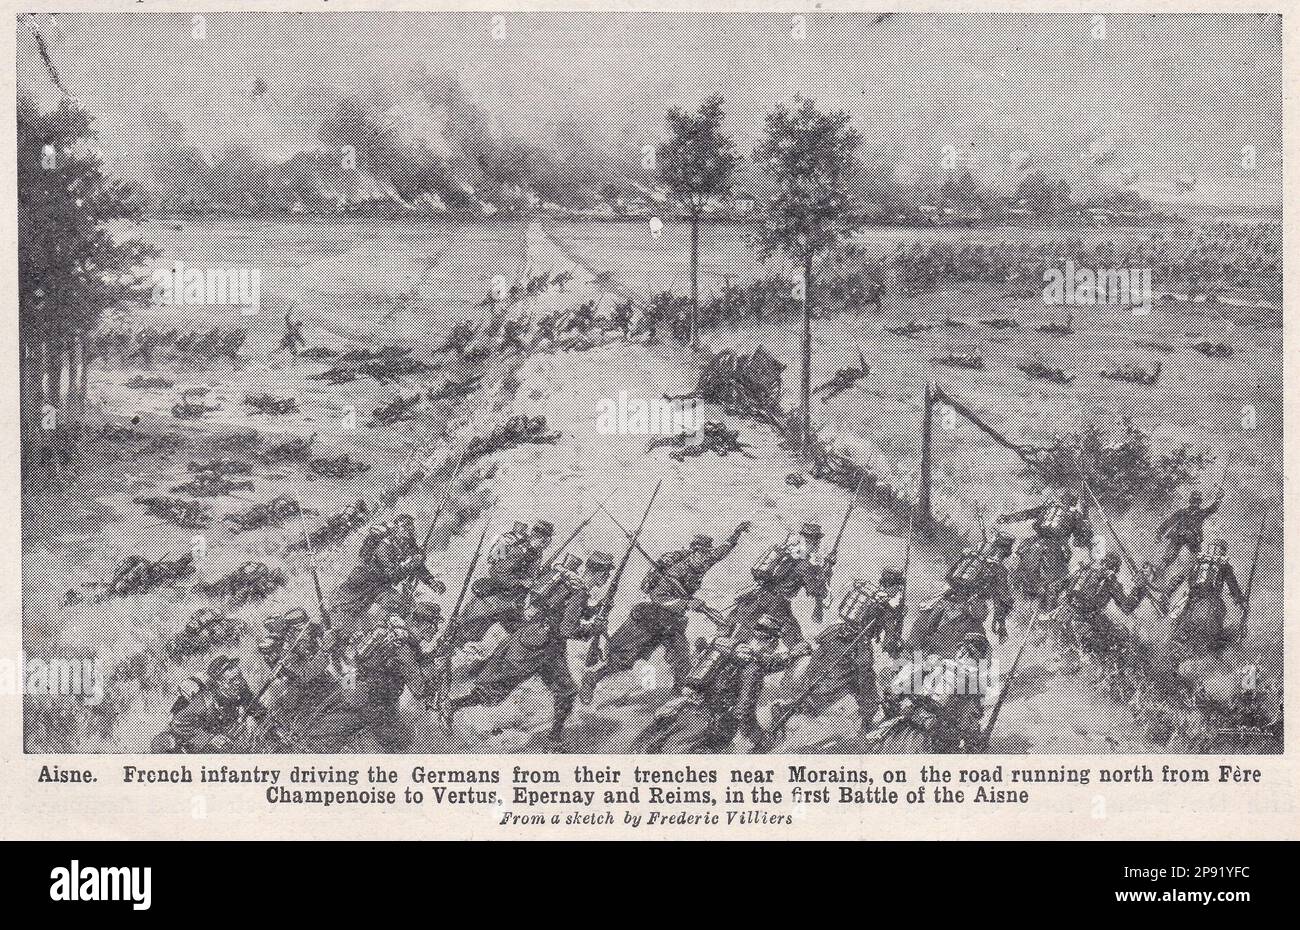 Aisne - French infantry driving the Germans from their trenches near Morains. Stock Photo